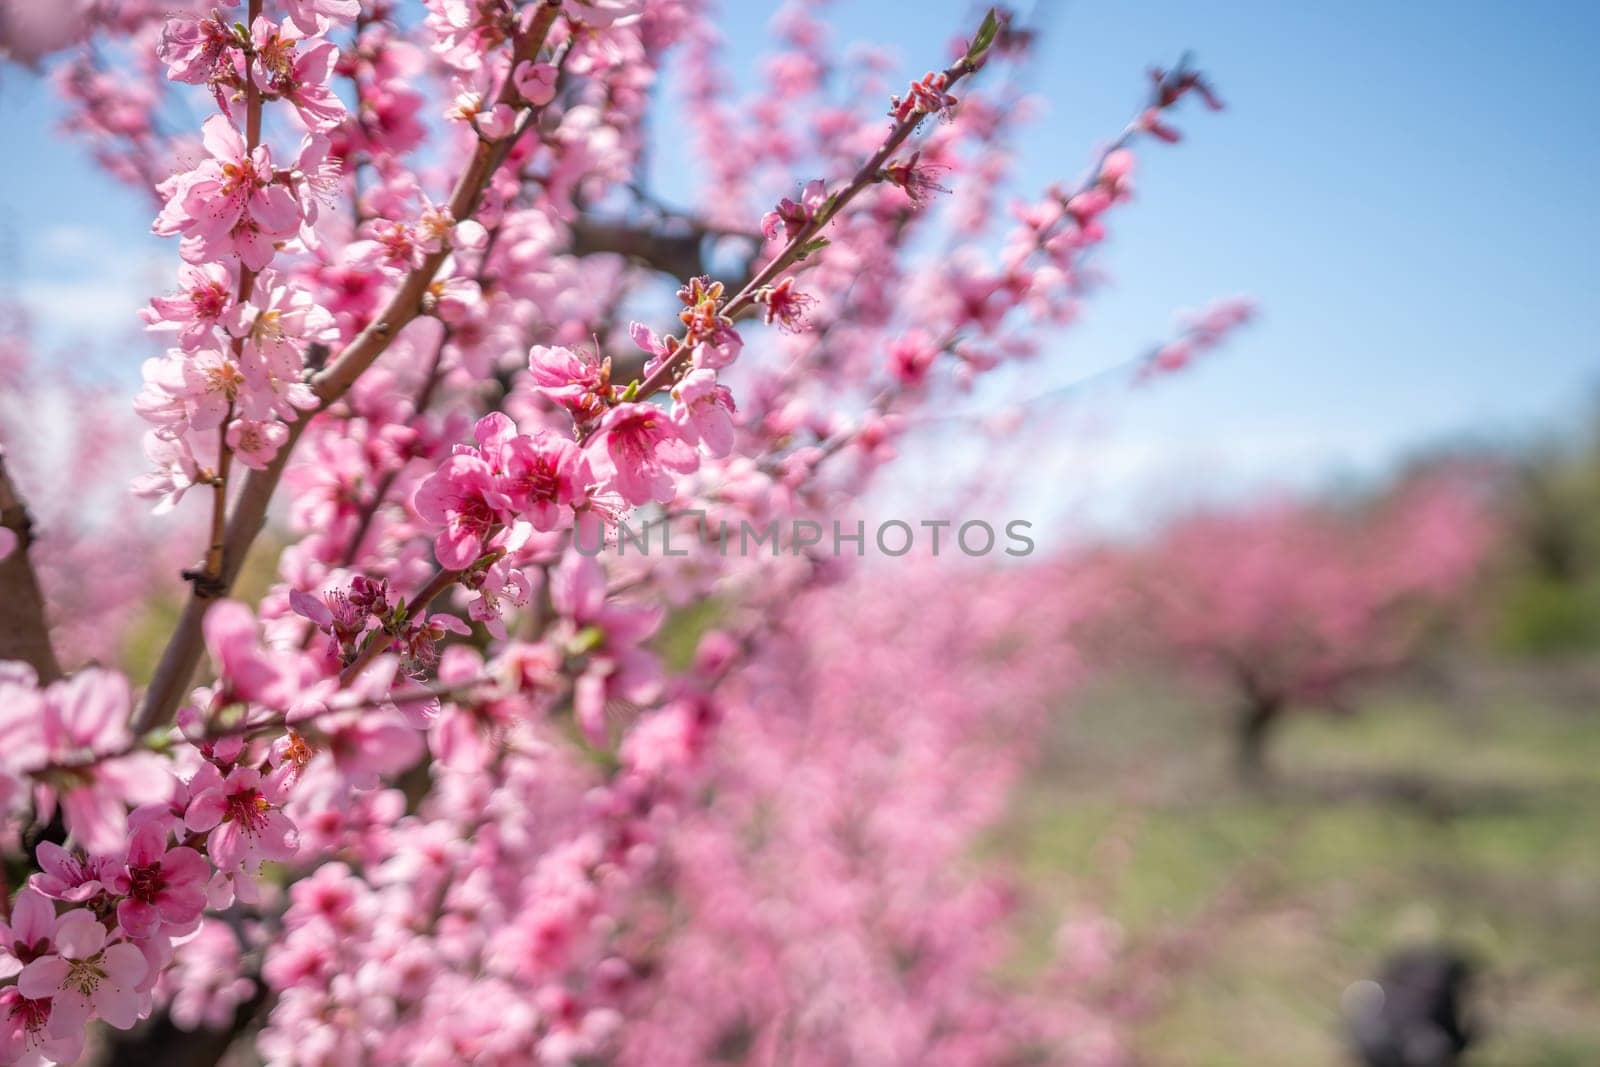 peach tree with pink flowers is in full bloom. The flowers are large and bright, and they are scattered throughout the tree. The tree is surrounded by a field, and the sky is clear and blue